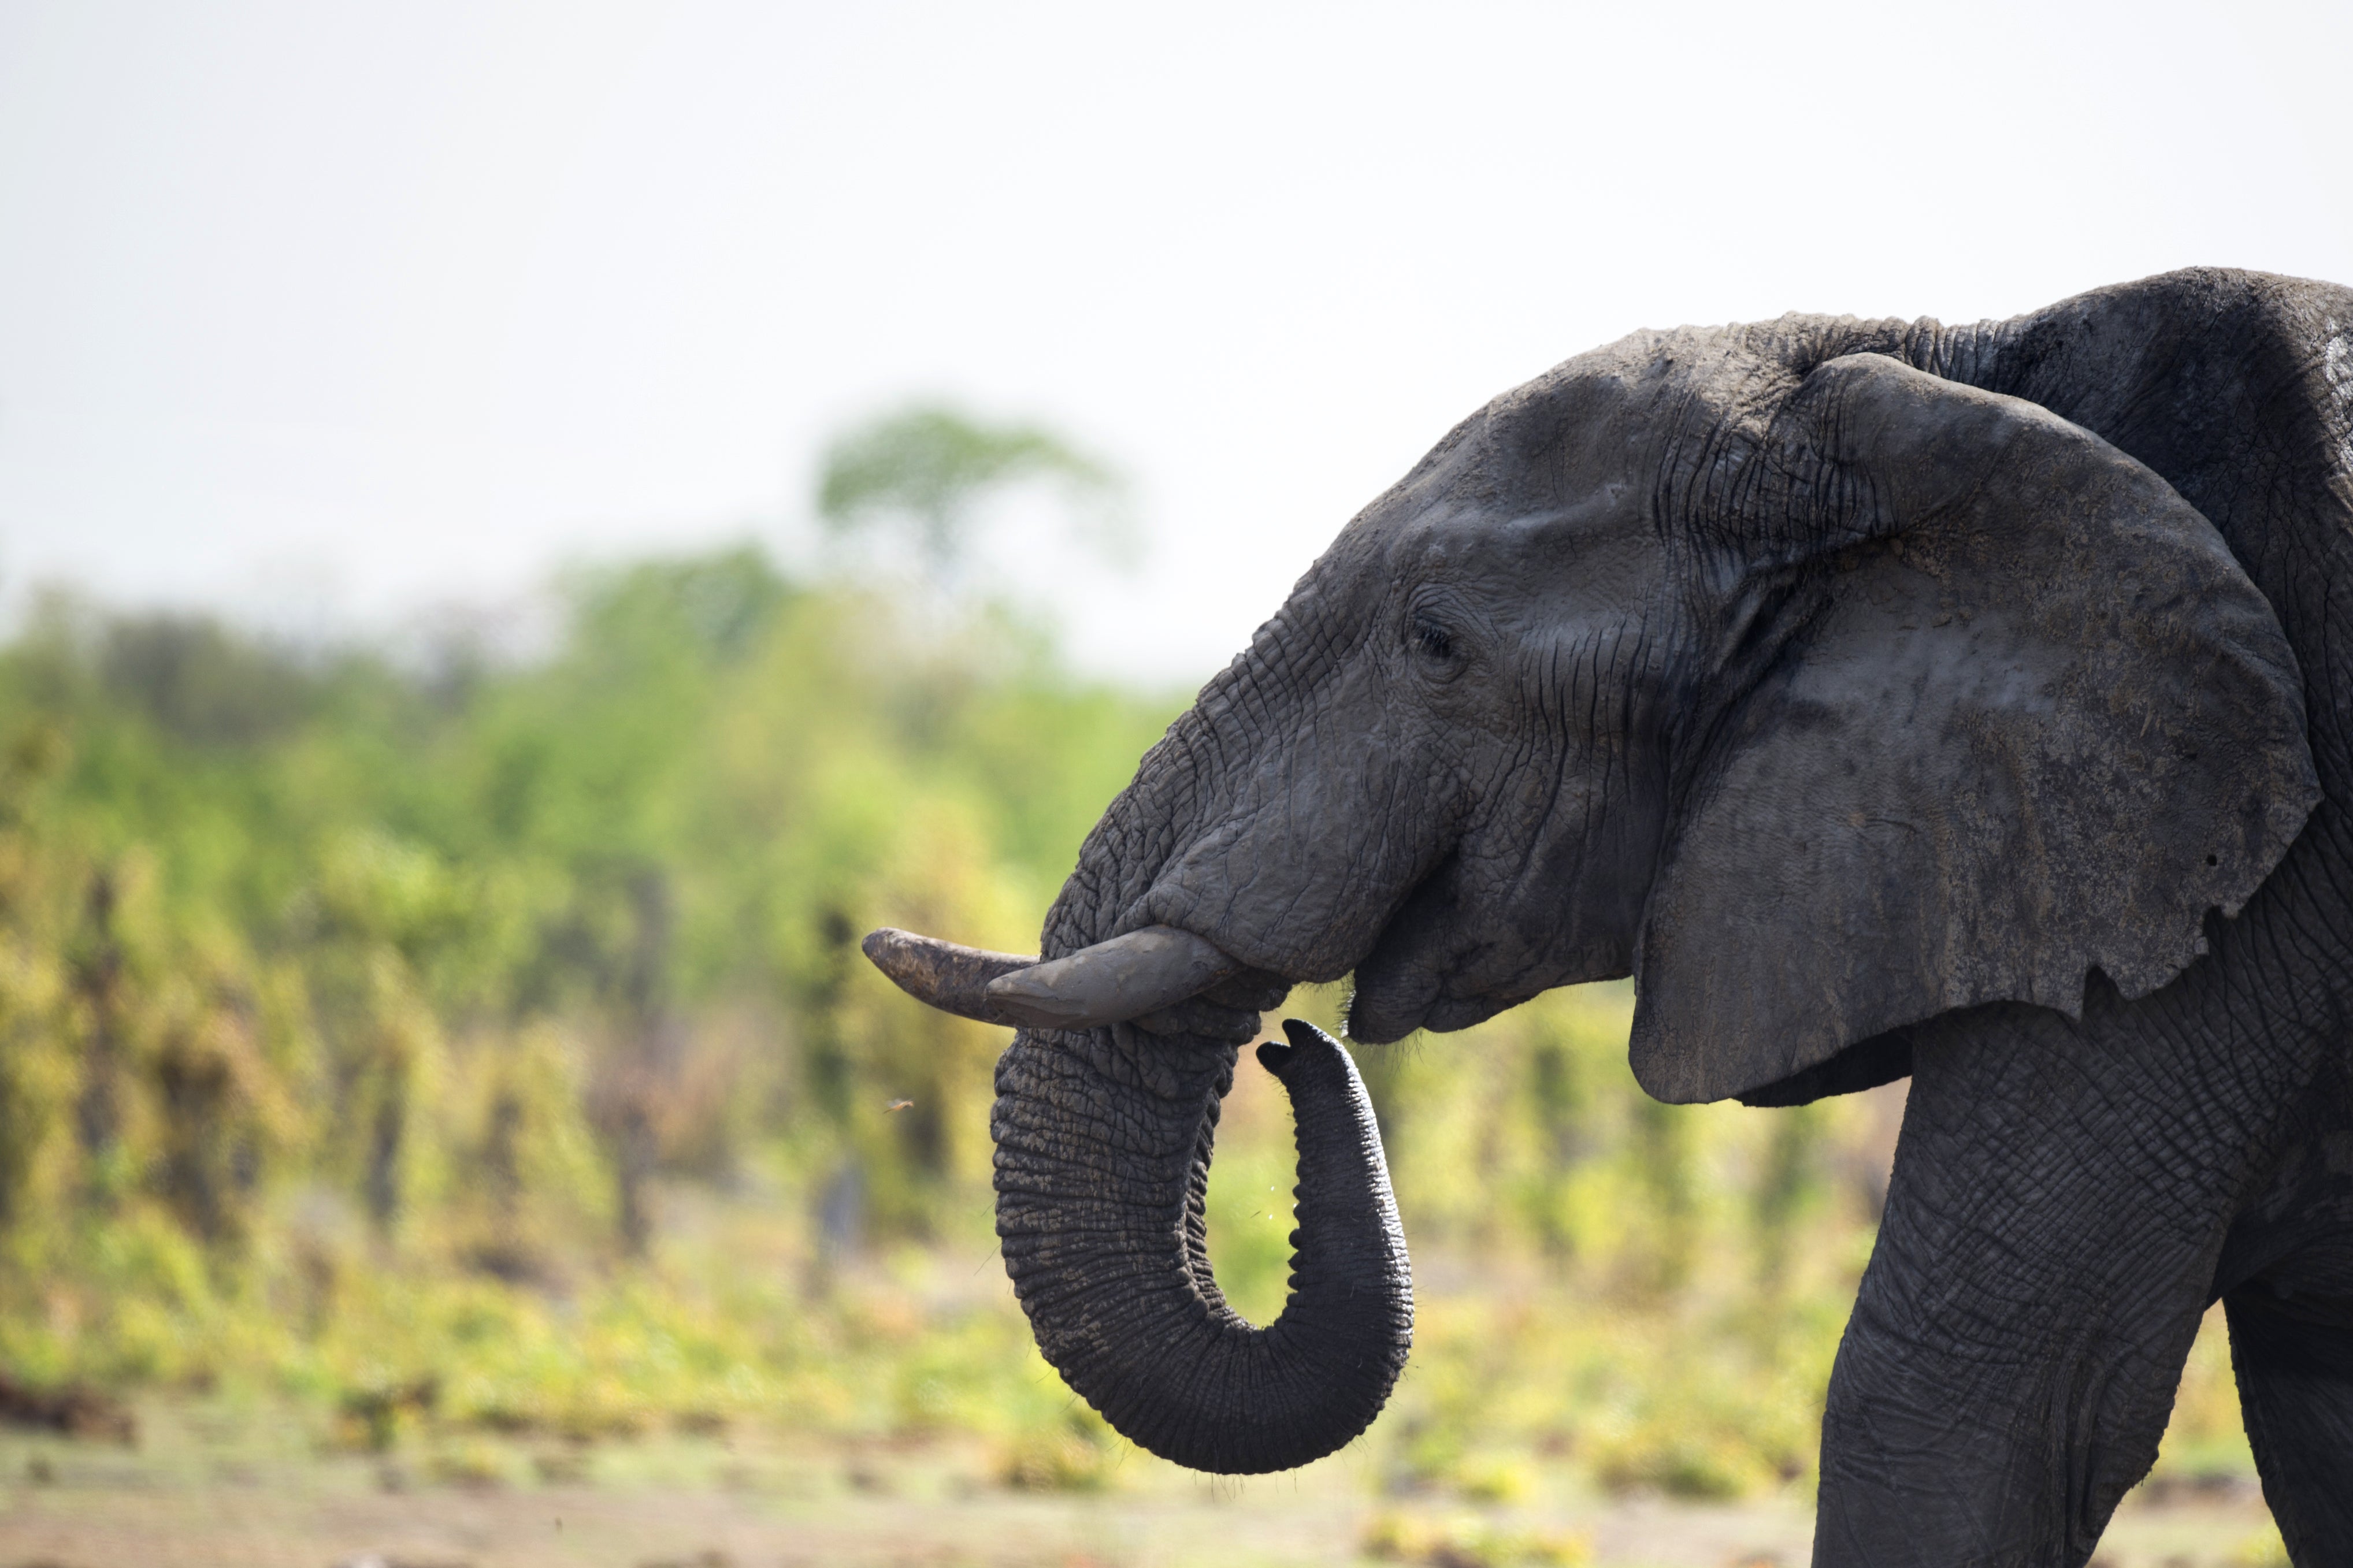 The African elephants may have died from a very rare disease linked to haemorrhagic septicaemia